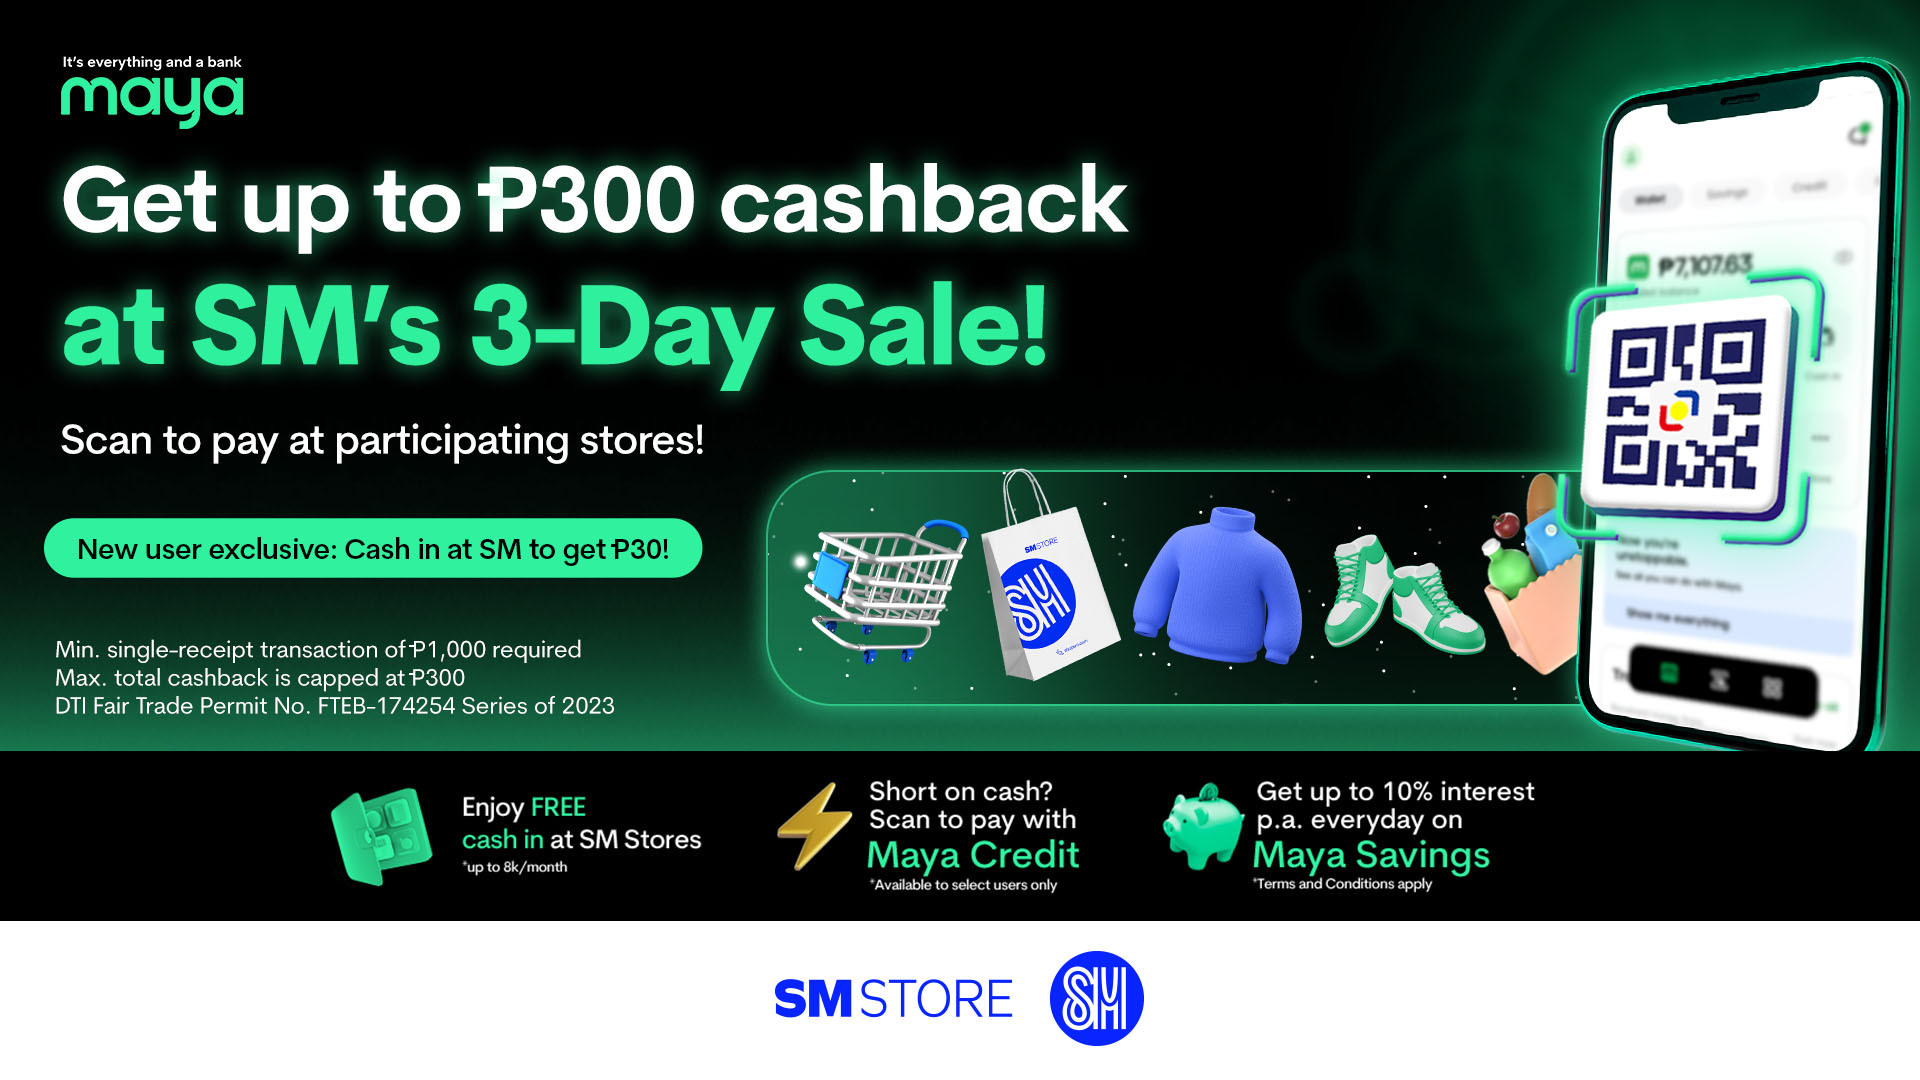 Get Up to P300 Cashback during SM's 3-Day Sale